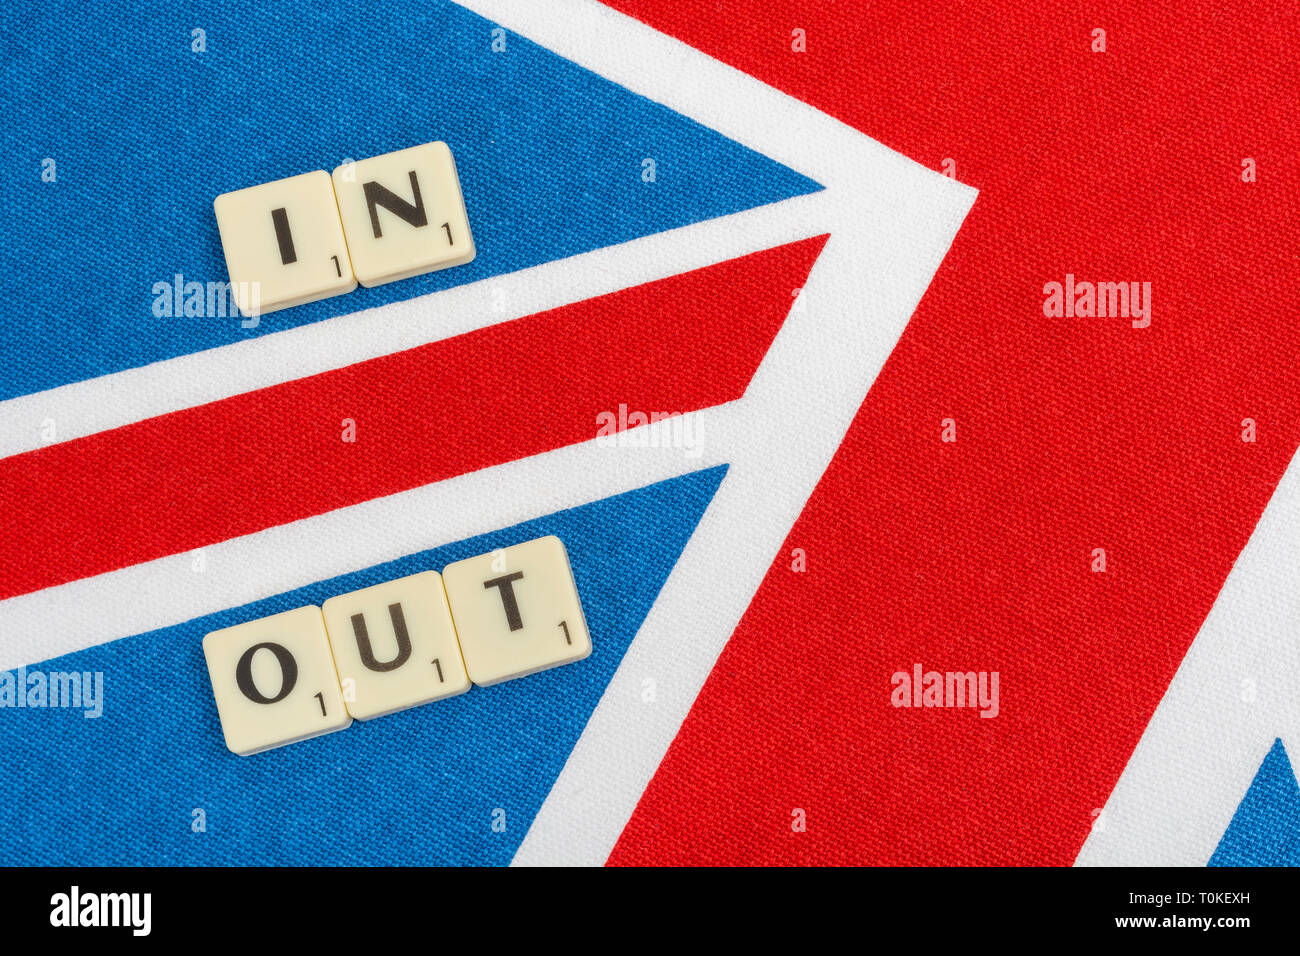 Union Jack with In/Out Brexit motif, with regard to staying in or exiting the EU, and the Cancel Brexit petition. Stock Photo